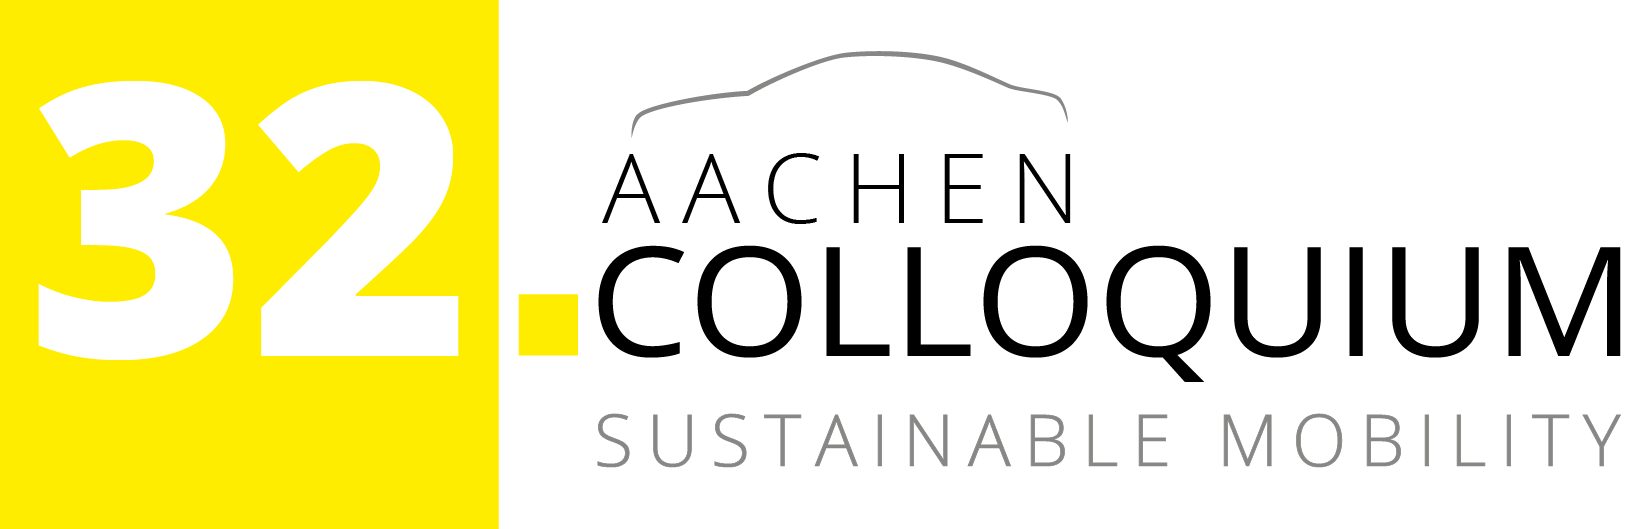 [Image: 32. Aachen Colloquium Sustainable Mobility]